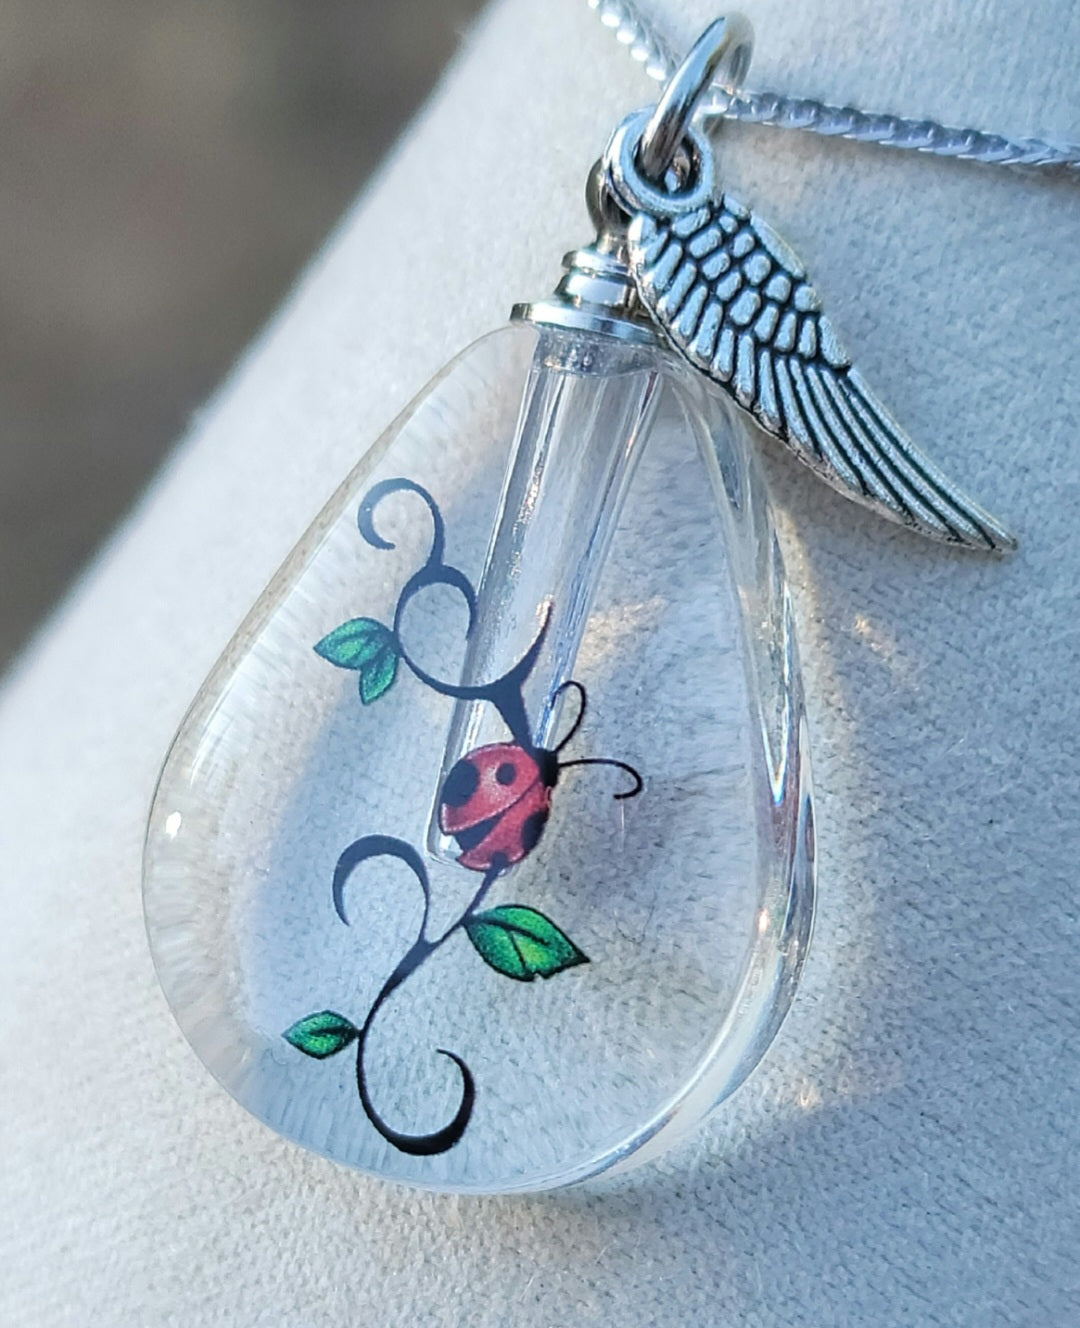 Sterling Silver Engraved Teardrop Urn Necklace - The Perfect Keepsake Gift